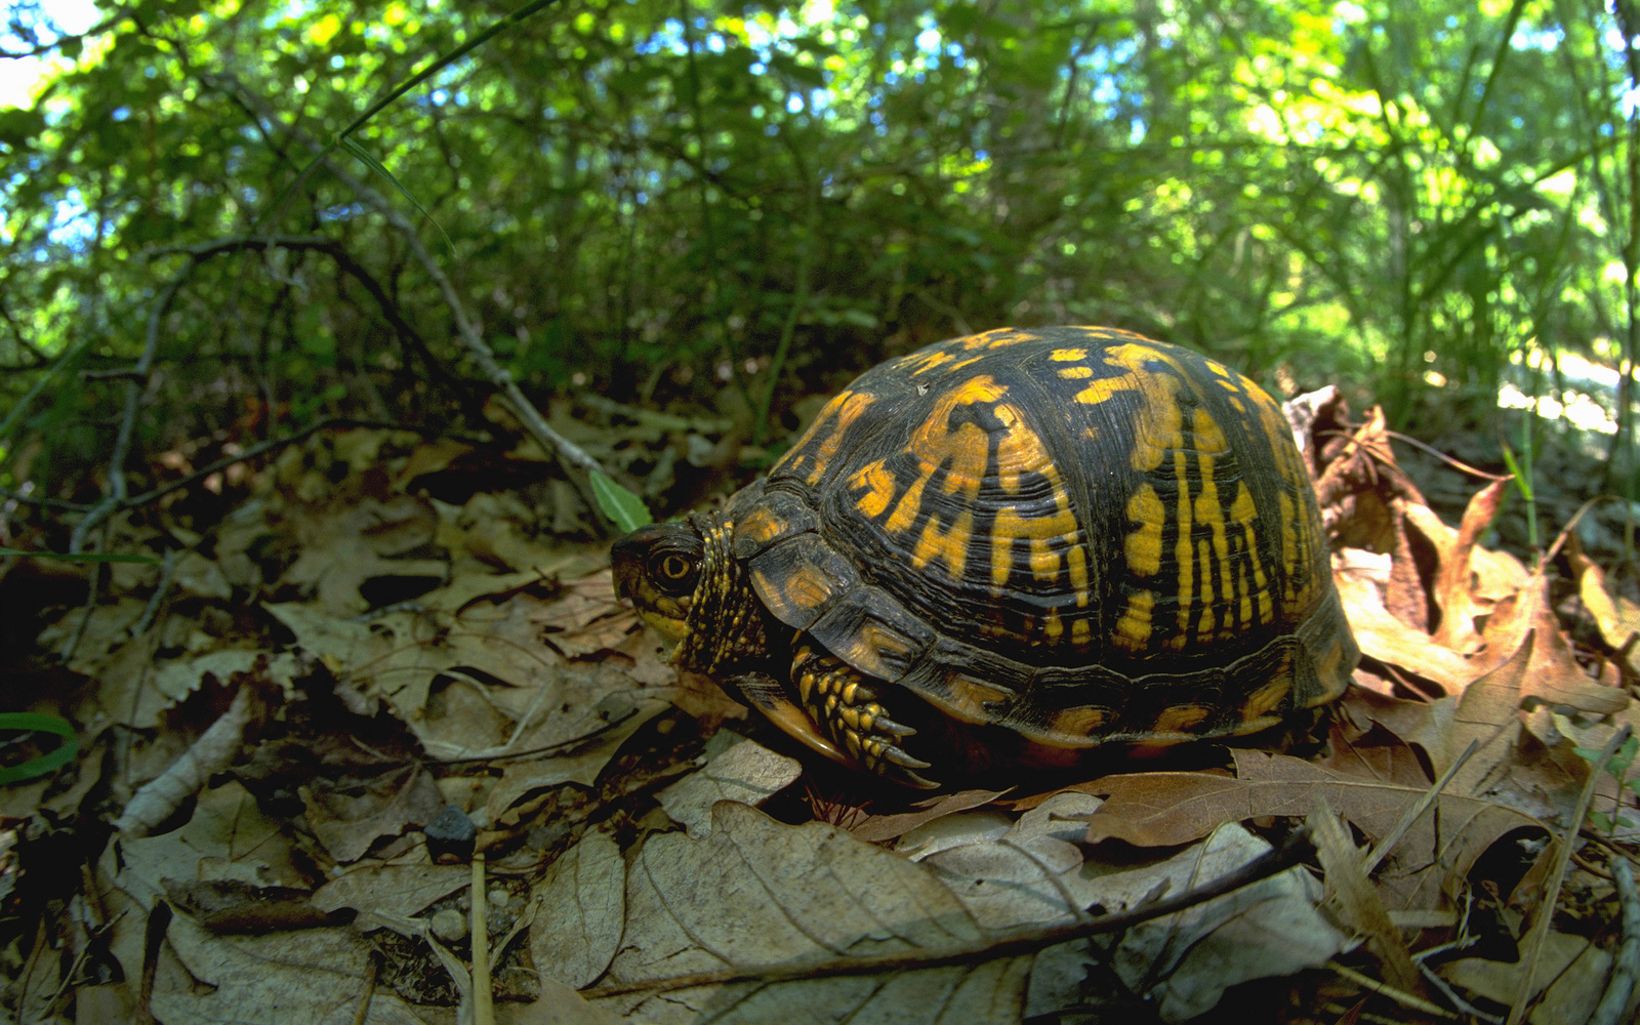 Closeup of a black and yellow box turtle sitting on a bed of dried leaves.